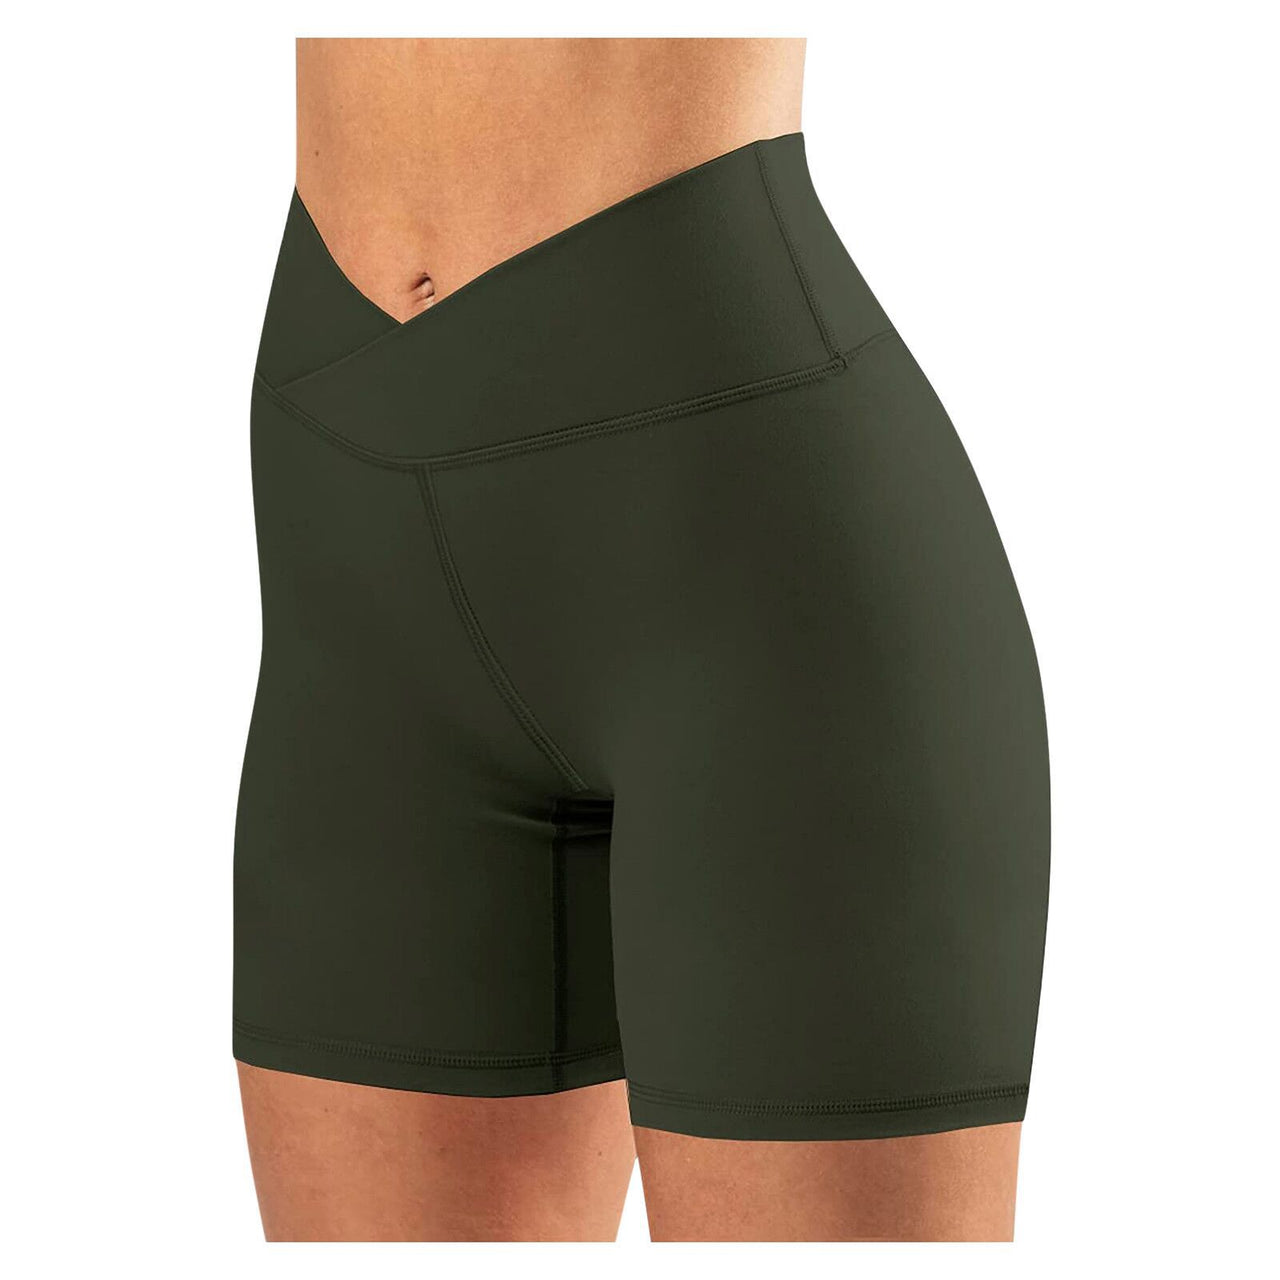 CrossFit Plus Size Fitness Shorts